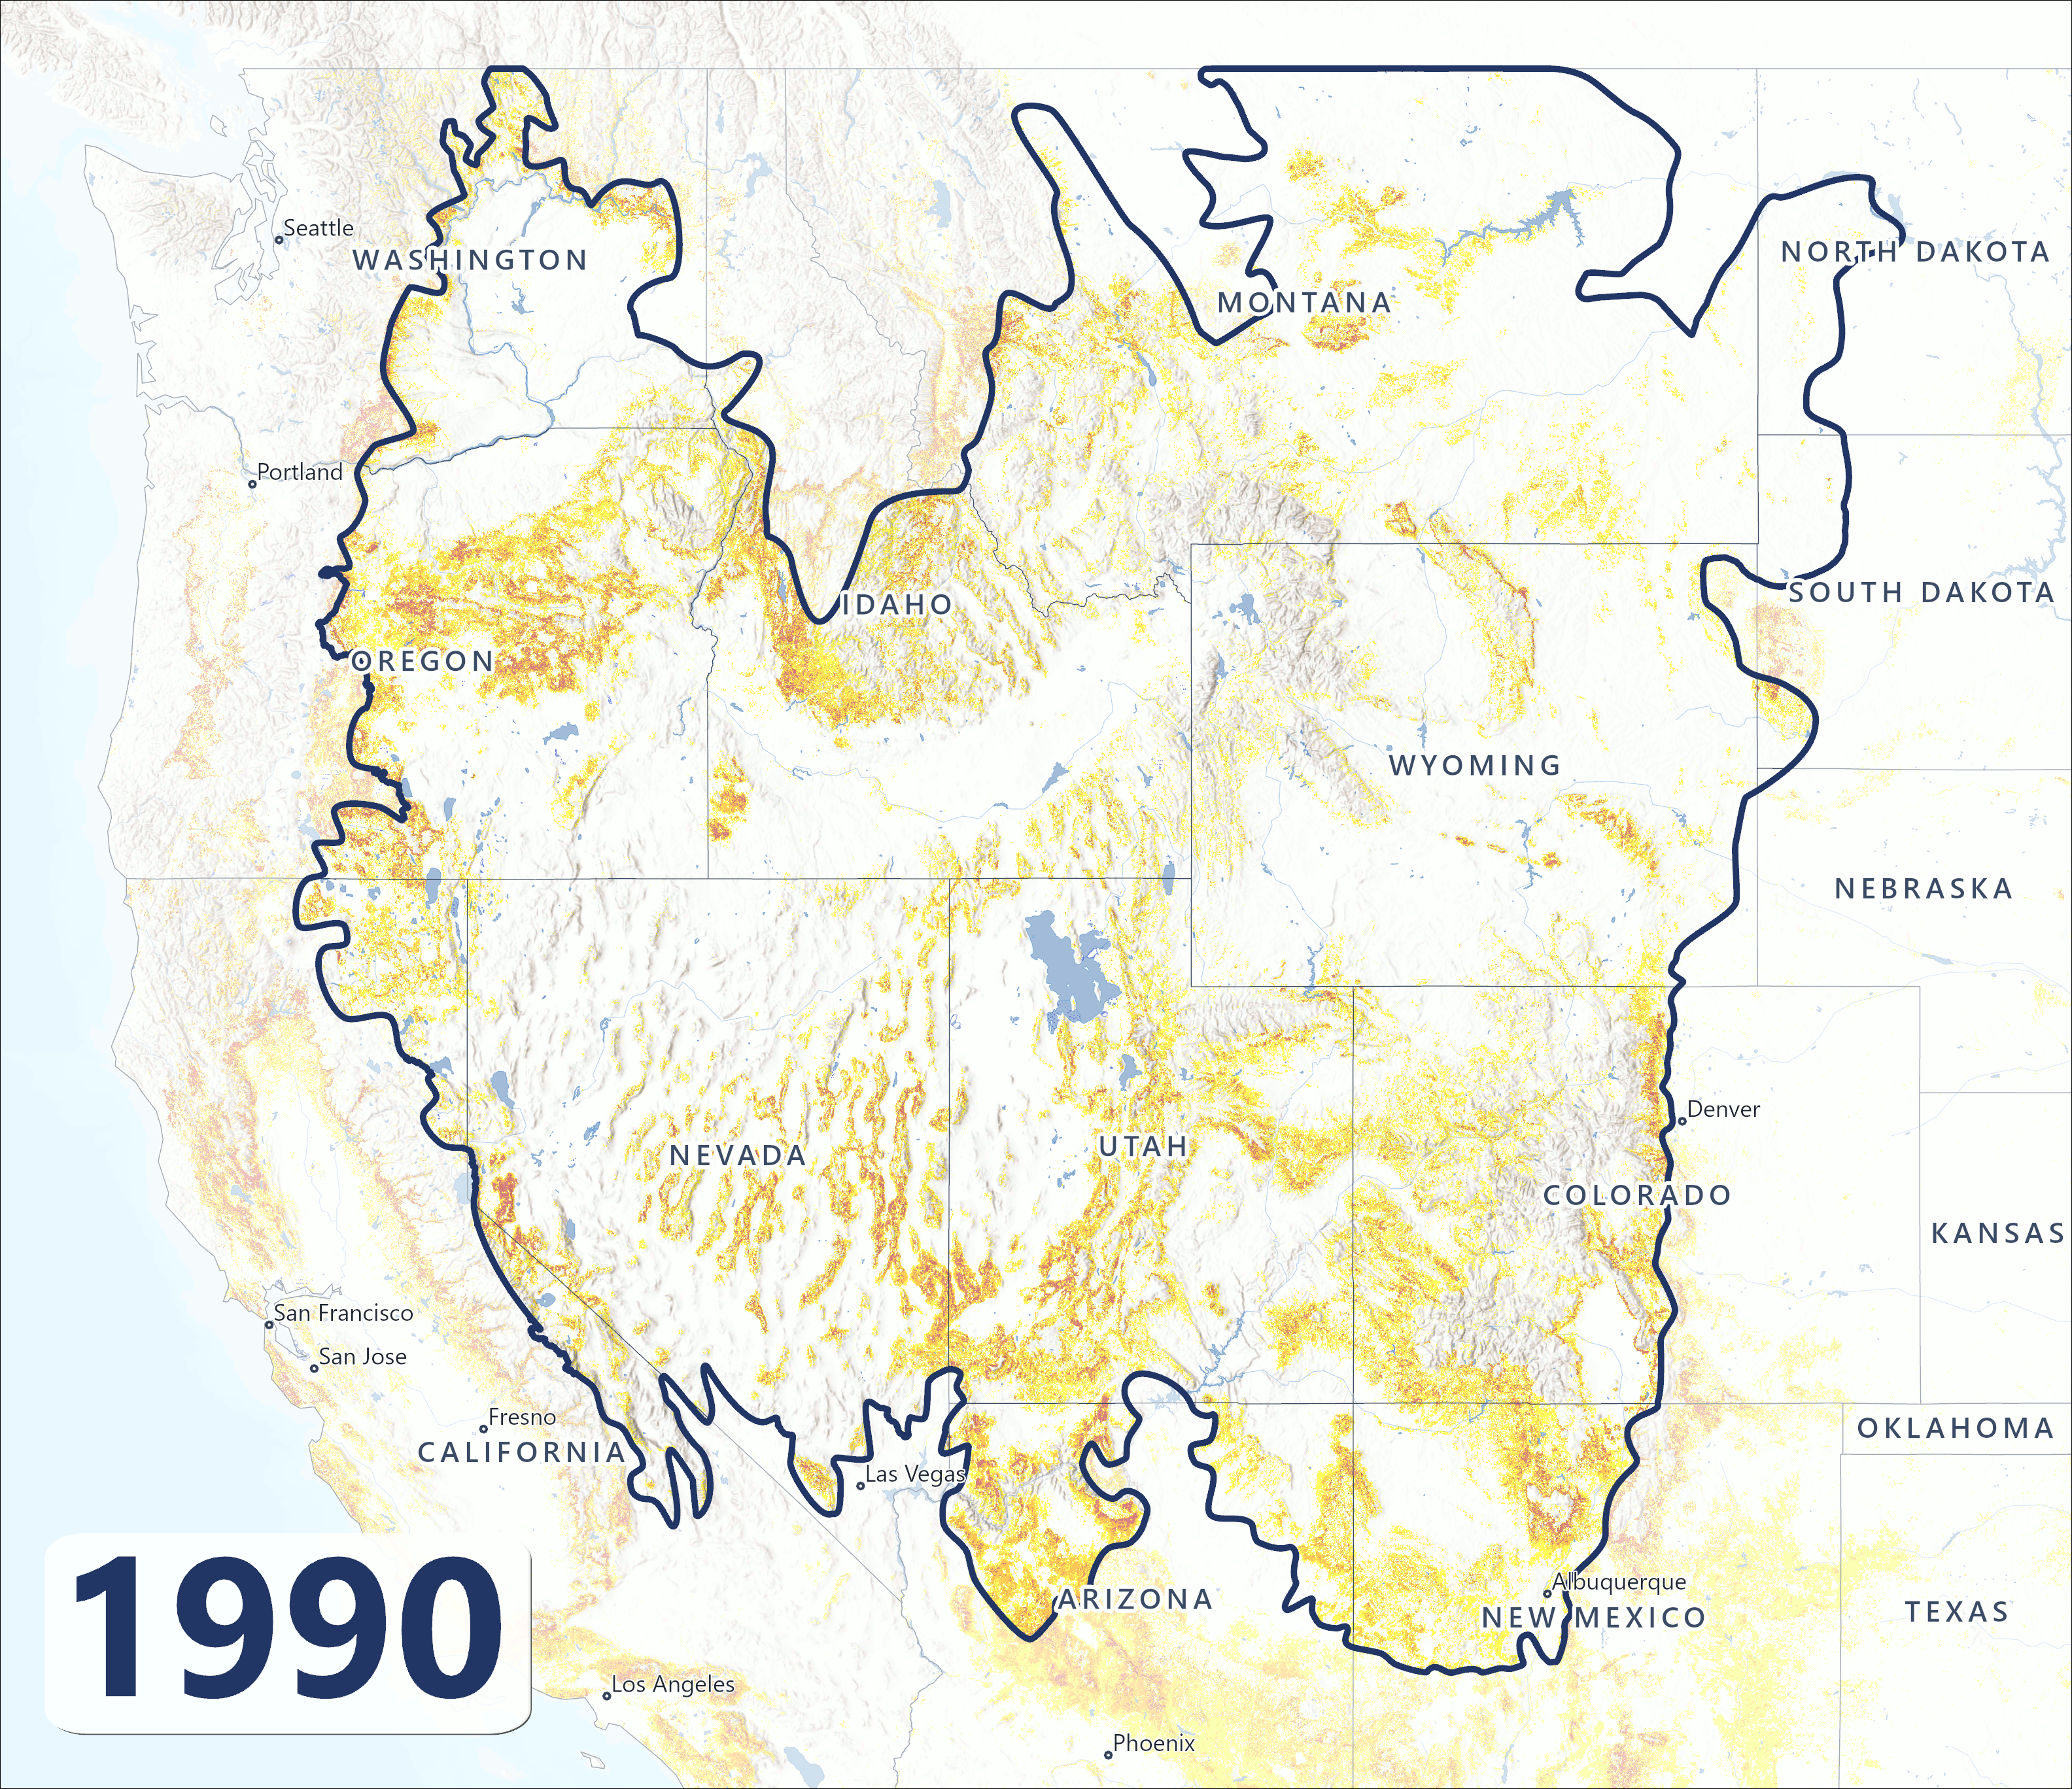 Tree Cover Change from 1990-2020